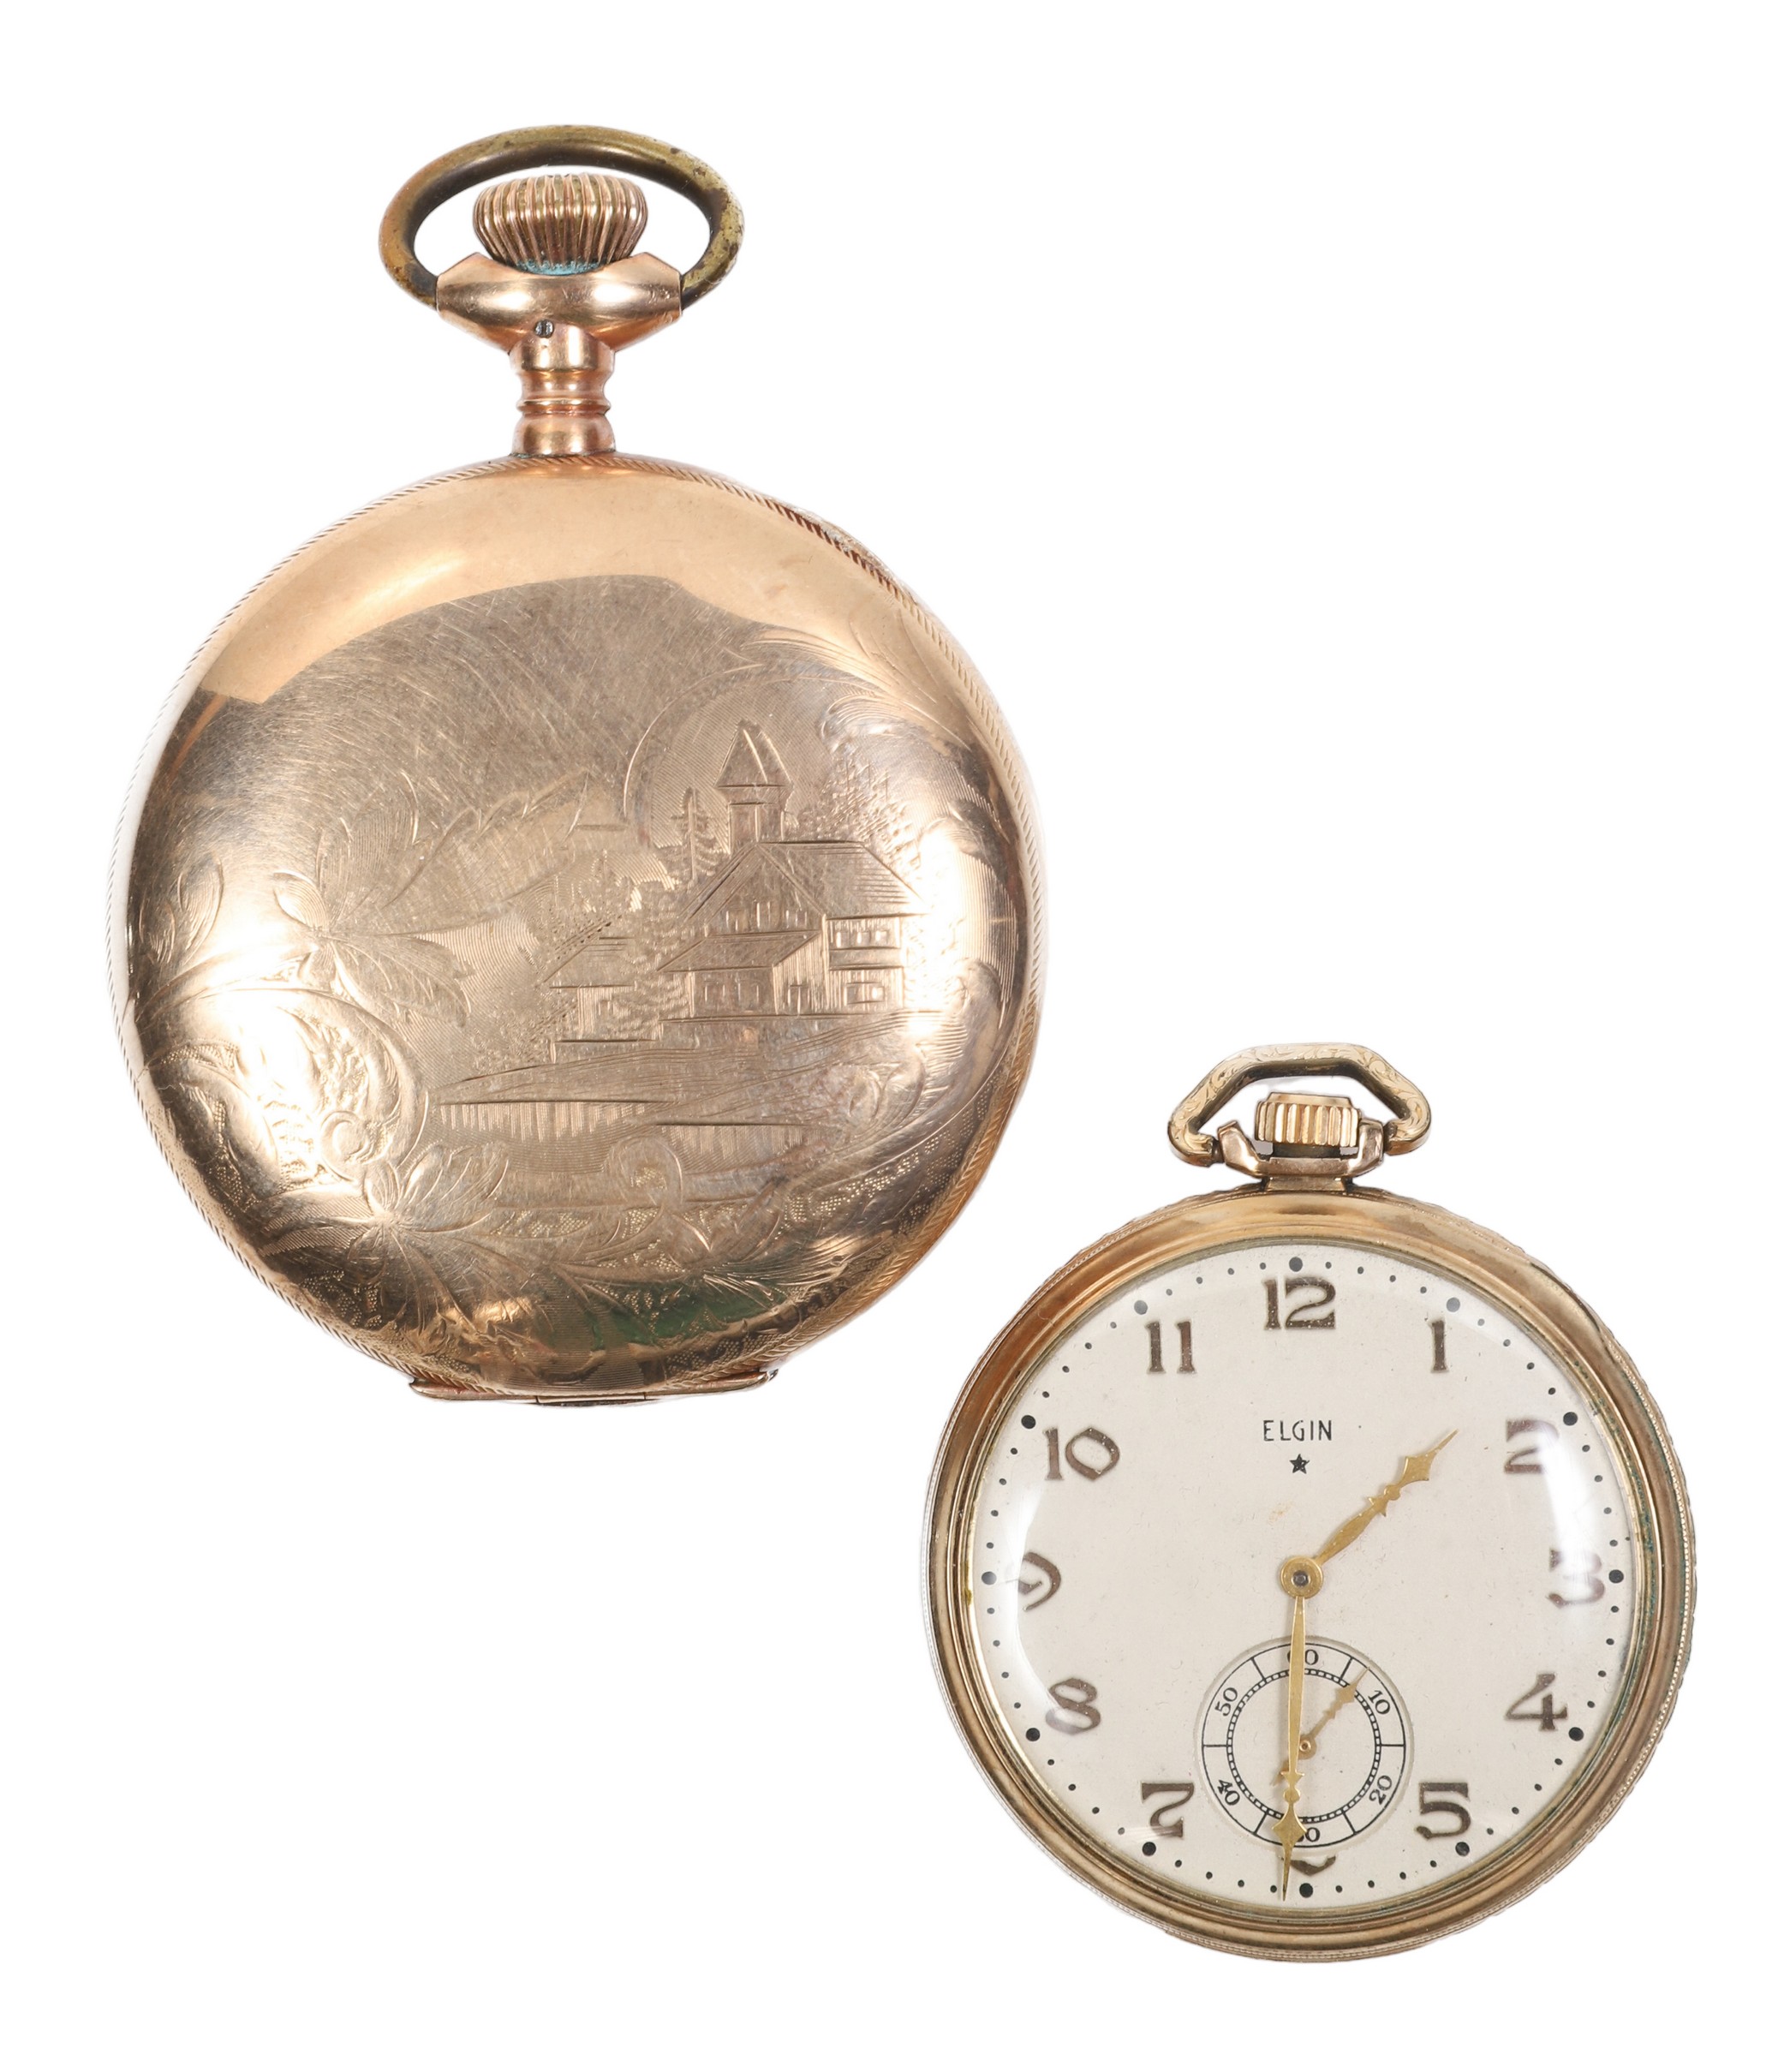  2 Gold filled pocket watches 2e0b7c